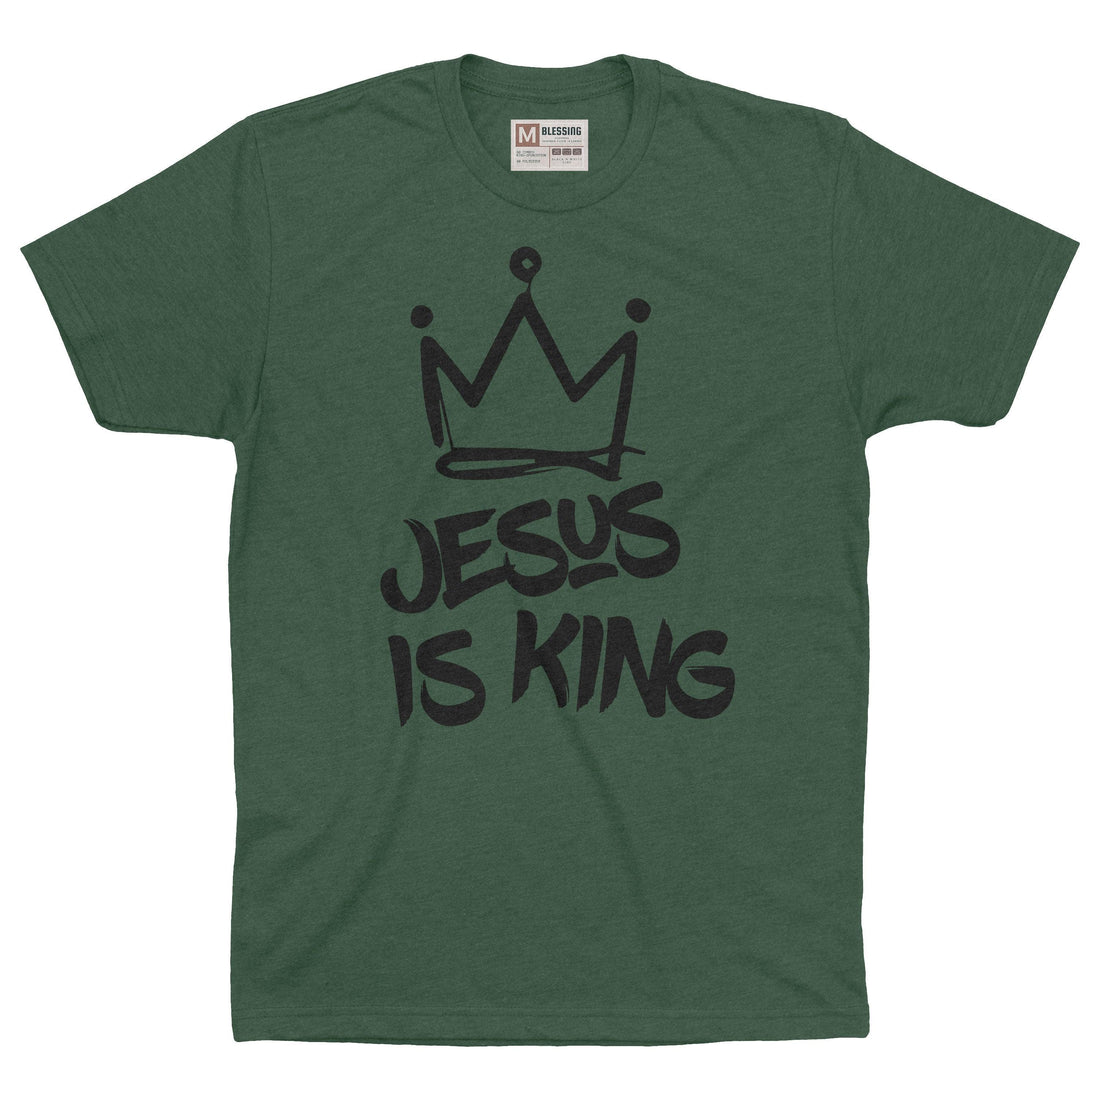 Jesus is King! - Blessing Clothing